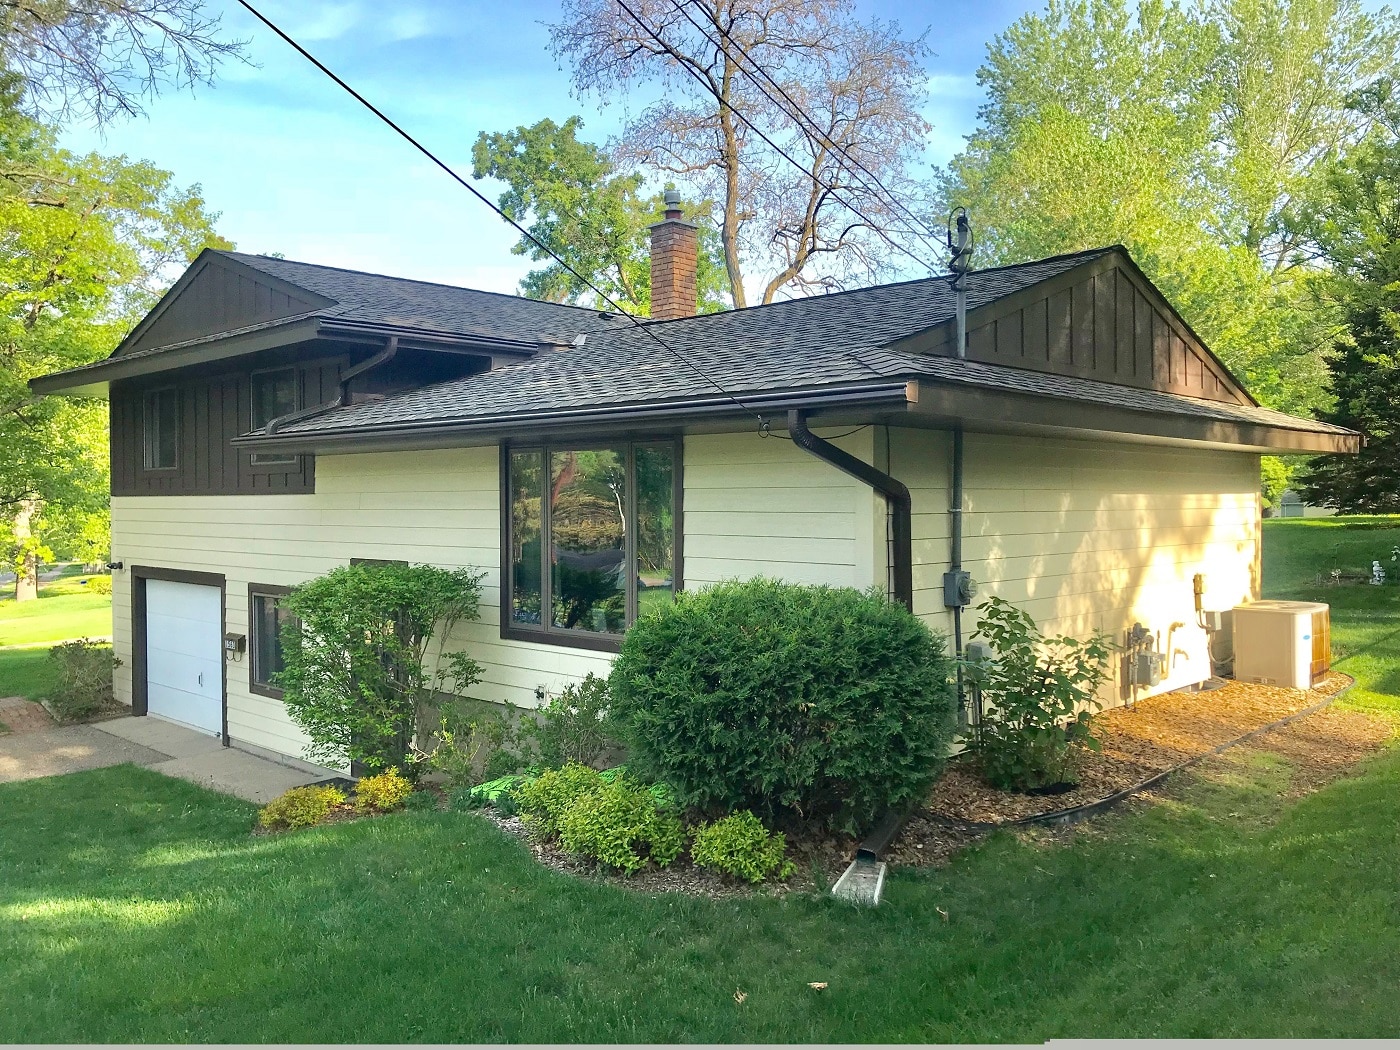  St. Paul home with SeasonGuard windows & LP SmartSide siding installed by Lindus Construction